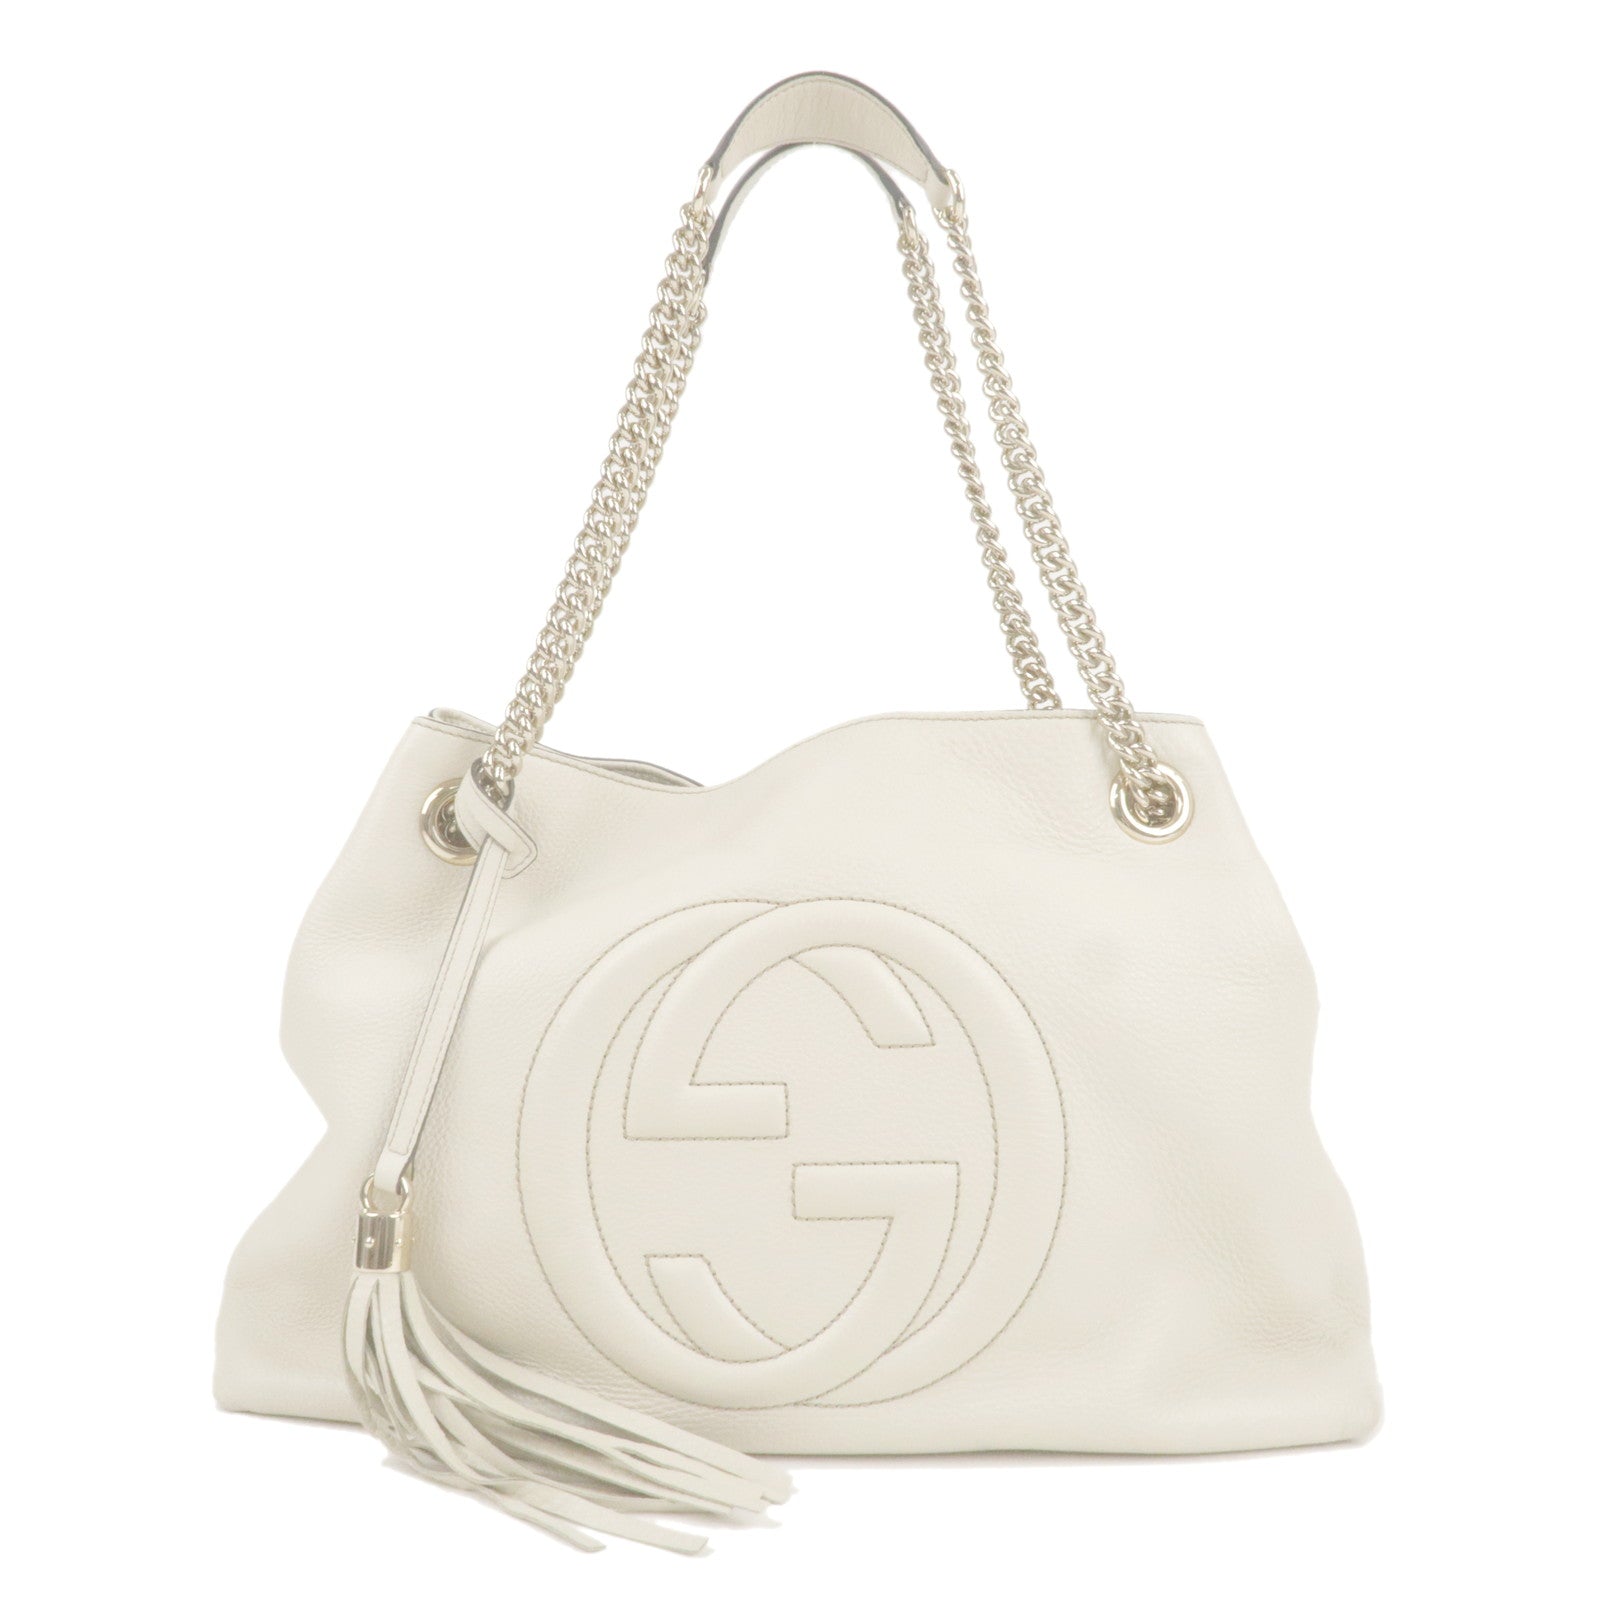 Authentic-GUCCI-SOHO-Leather-Chain-Shoulder-Bag-Tote-Bag-Ivory